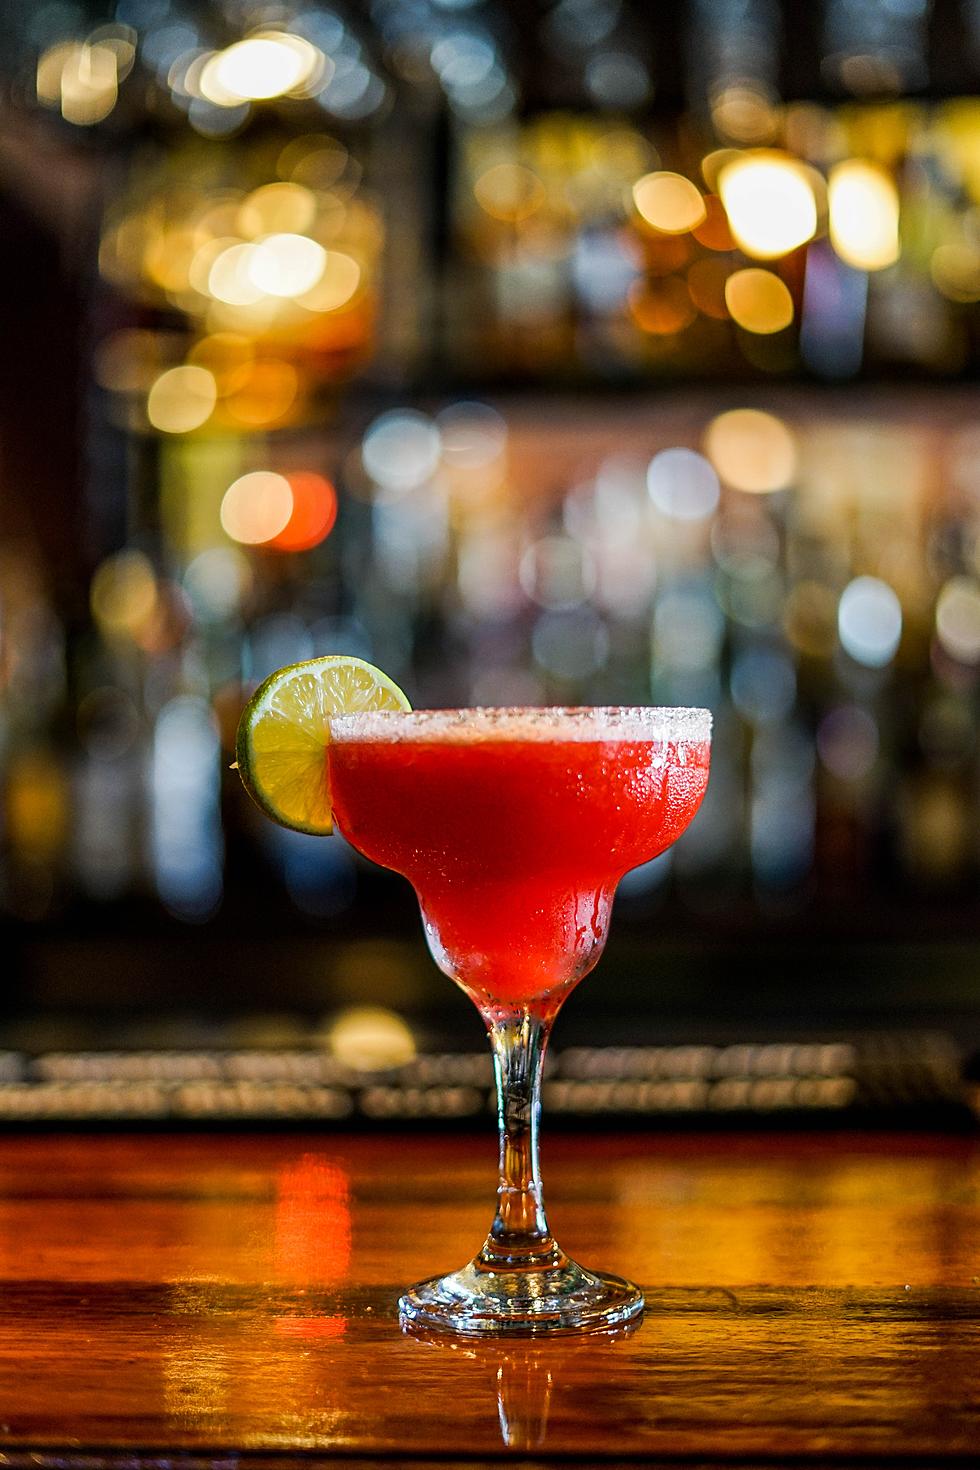 10 Best Places To Get Margaritas According To Yellow Pages